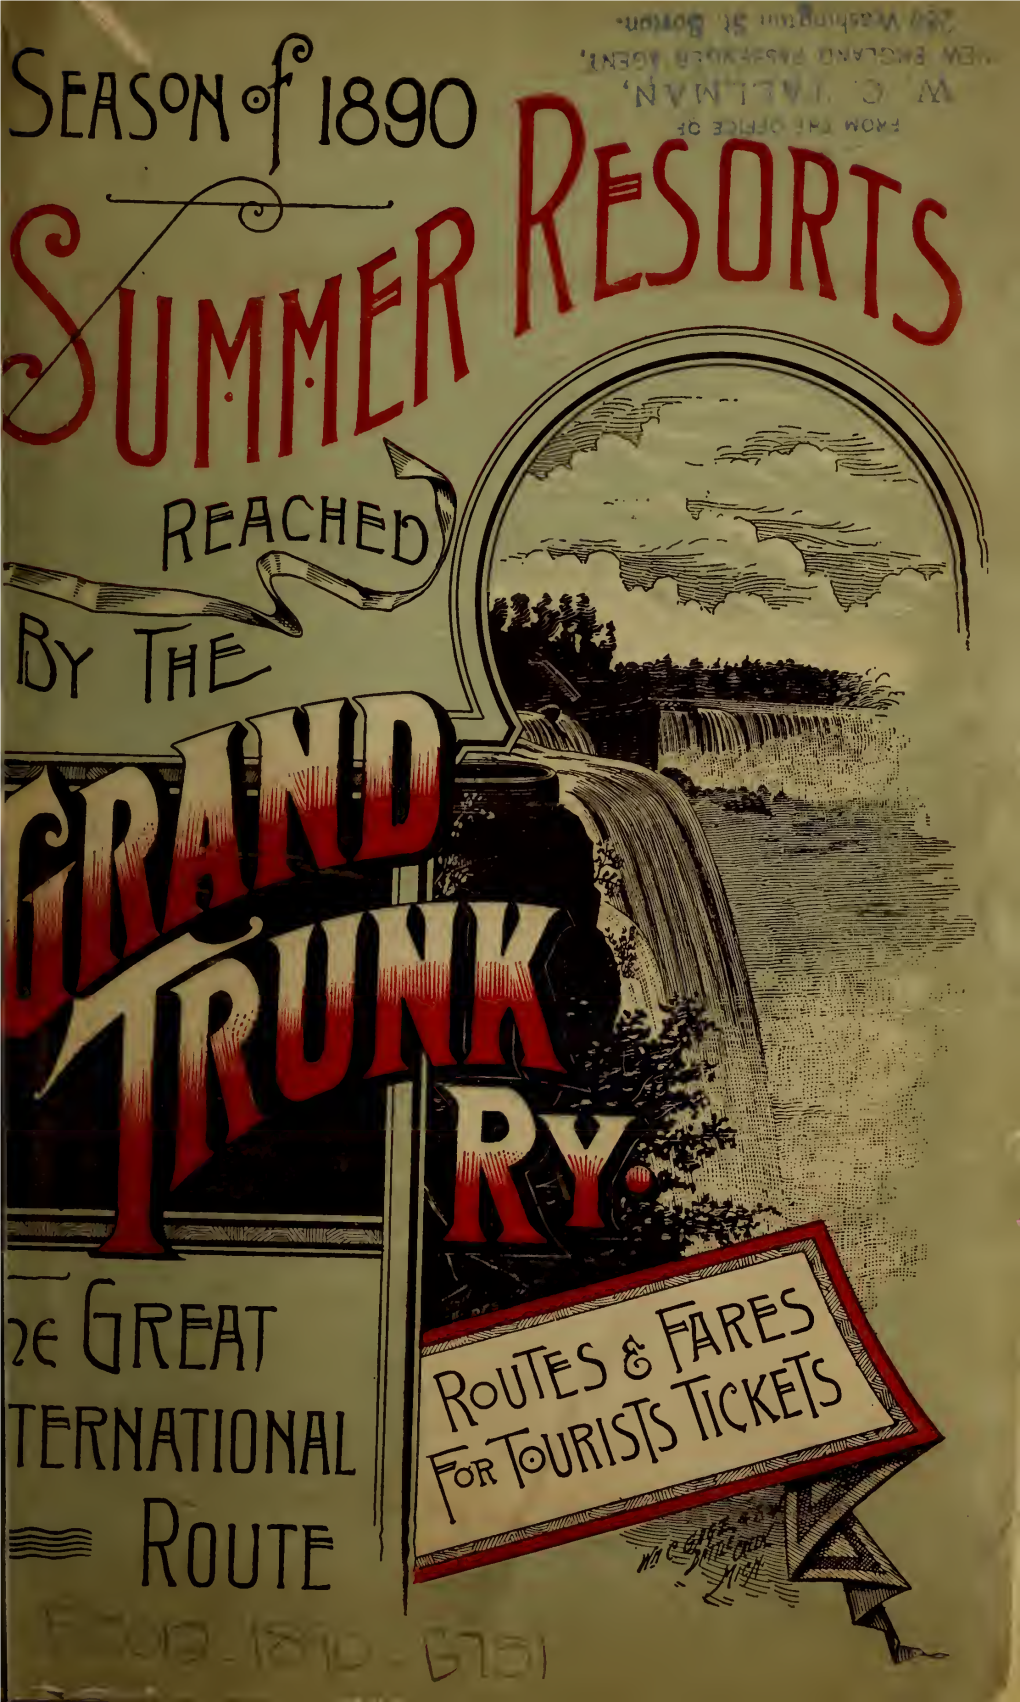 Season of 1890. Summer Resorts Reached by the Grank Trunk Railway